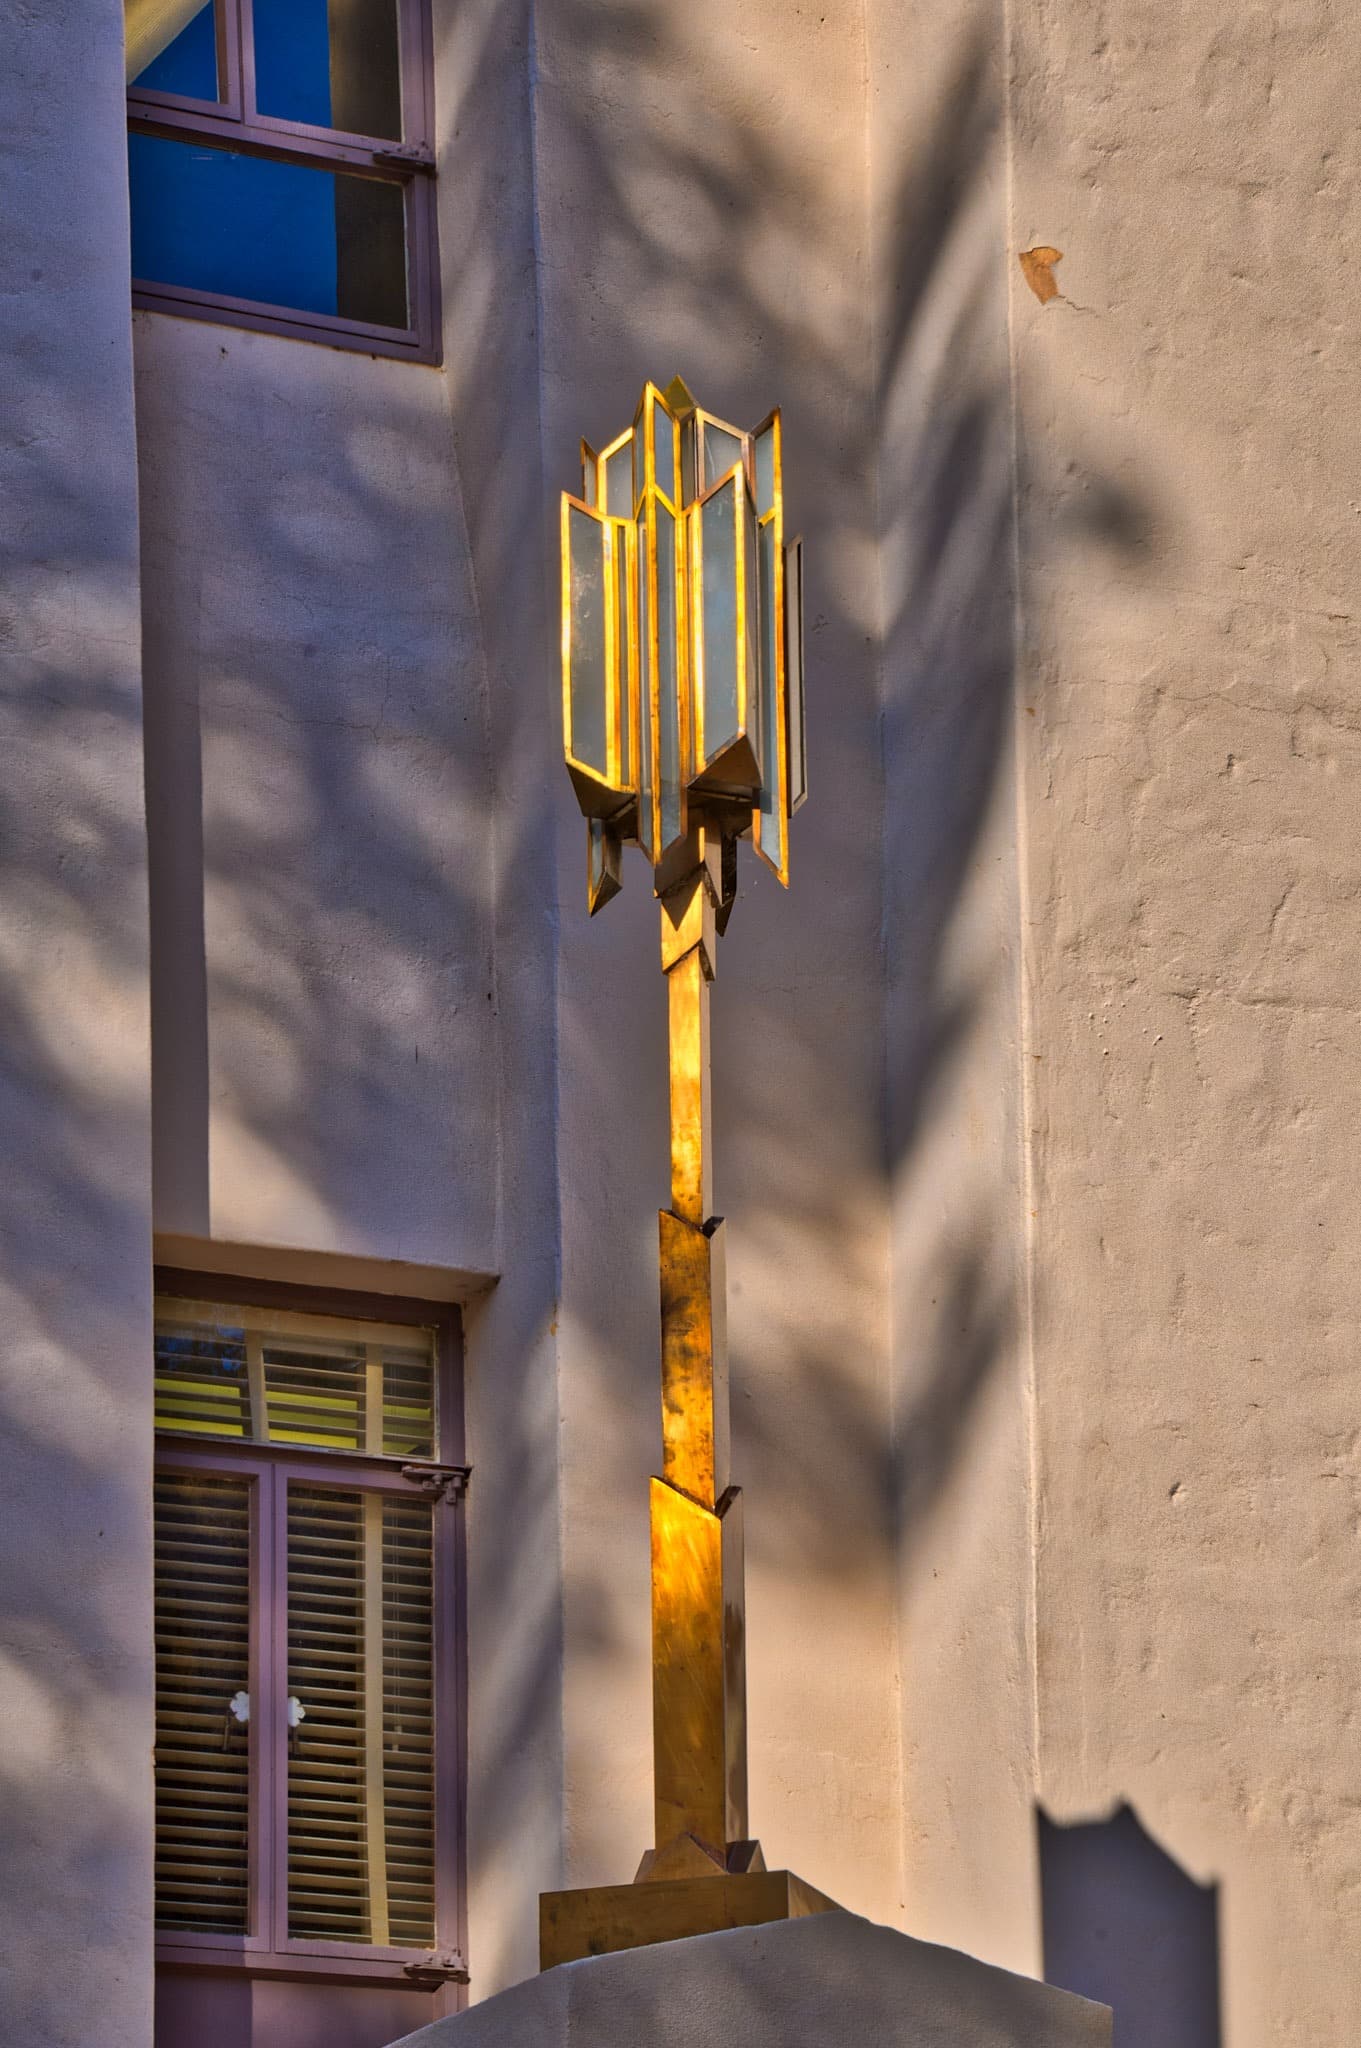 These Art Deco style lamps frame the entrance to the Cochise County Courthous in Bisbee, Arizona. Much of the metal embellishment inside and outside are made of copper. However, these lamps may be casr from a harder copper alloy, such as brass or bronze.